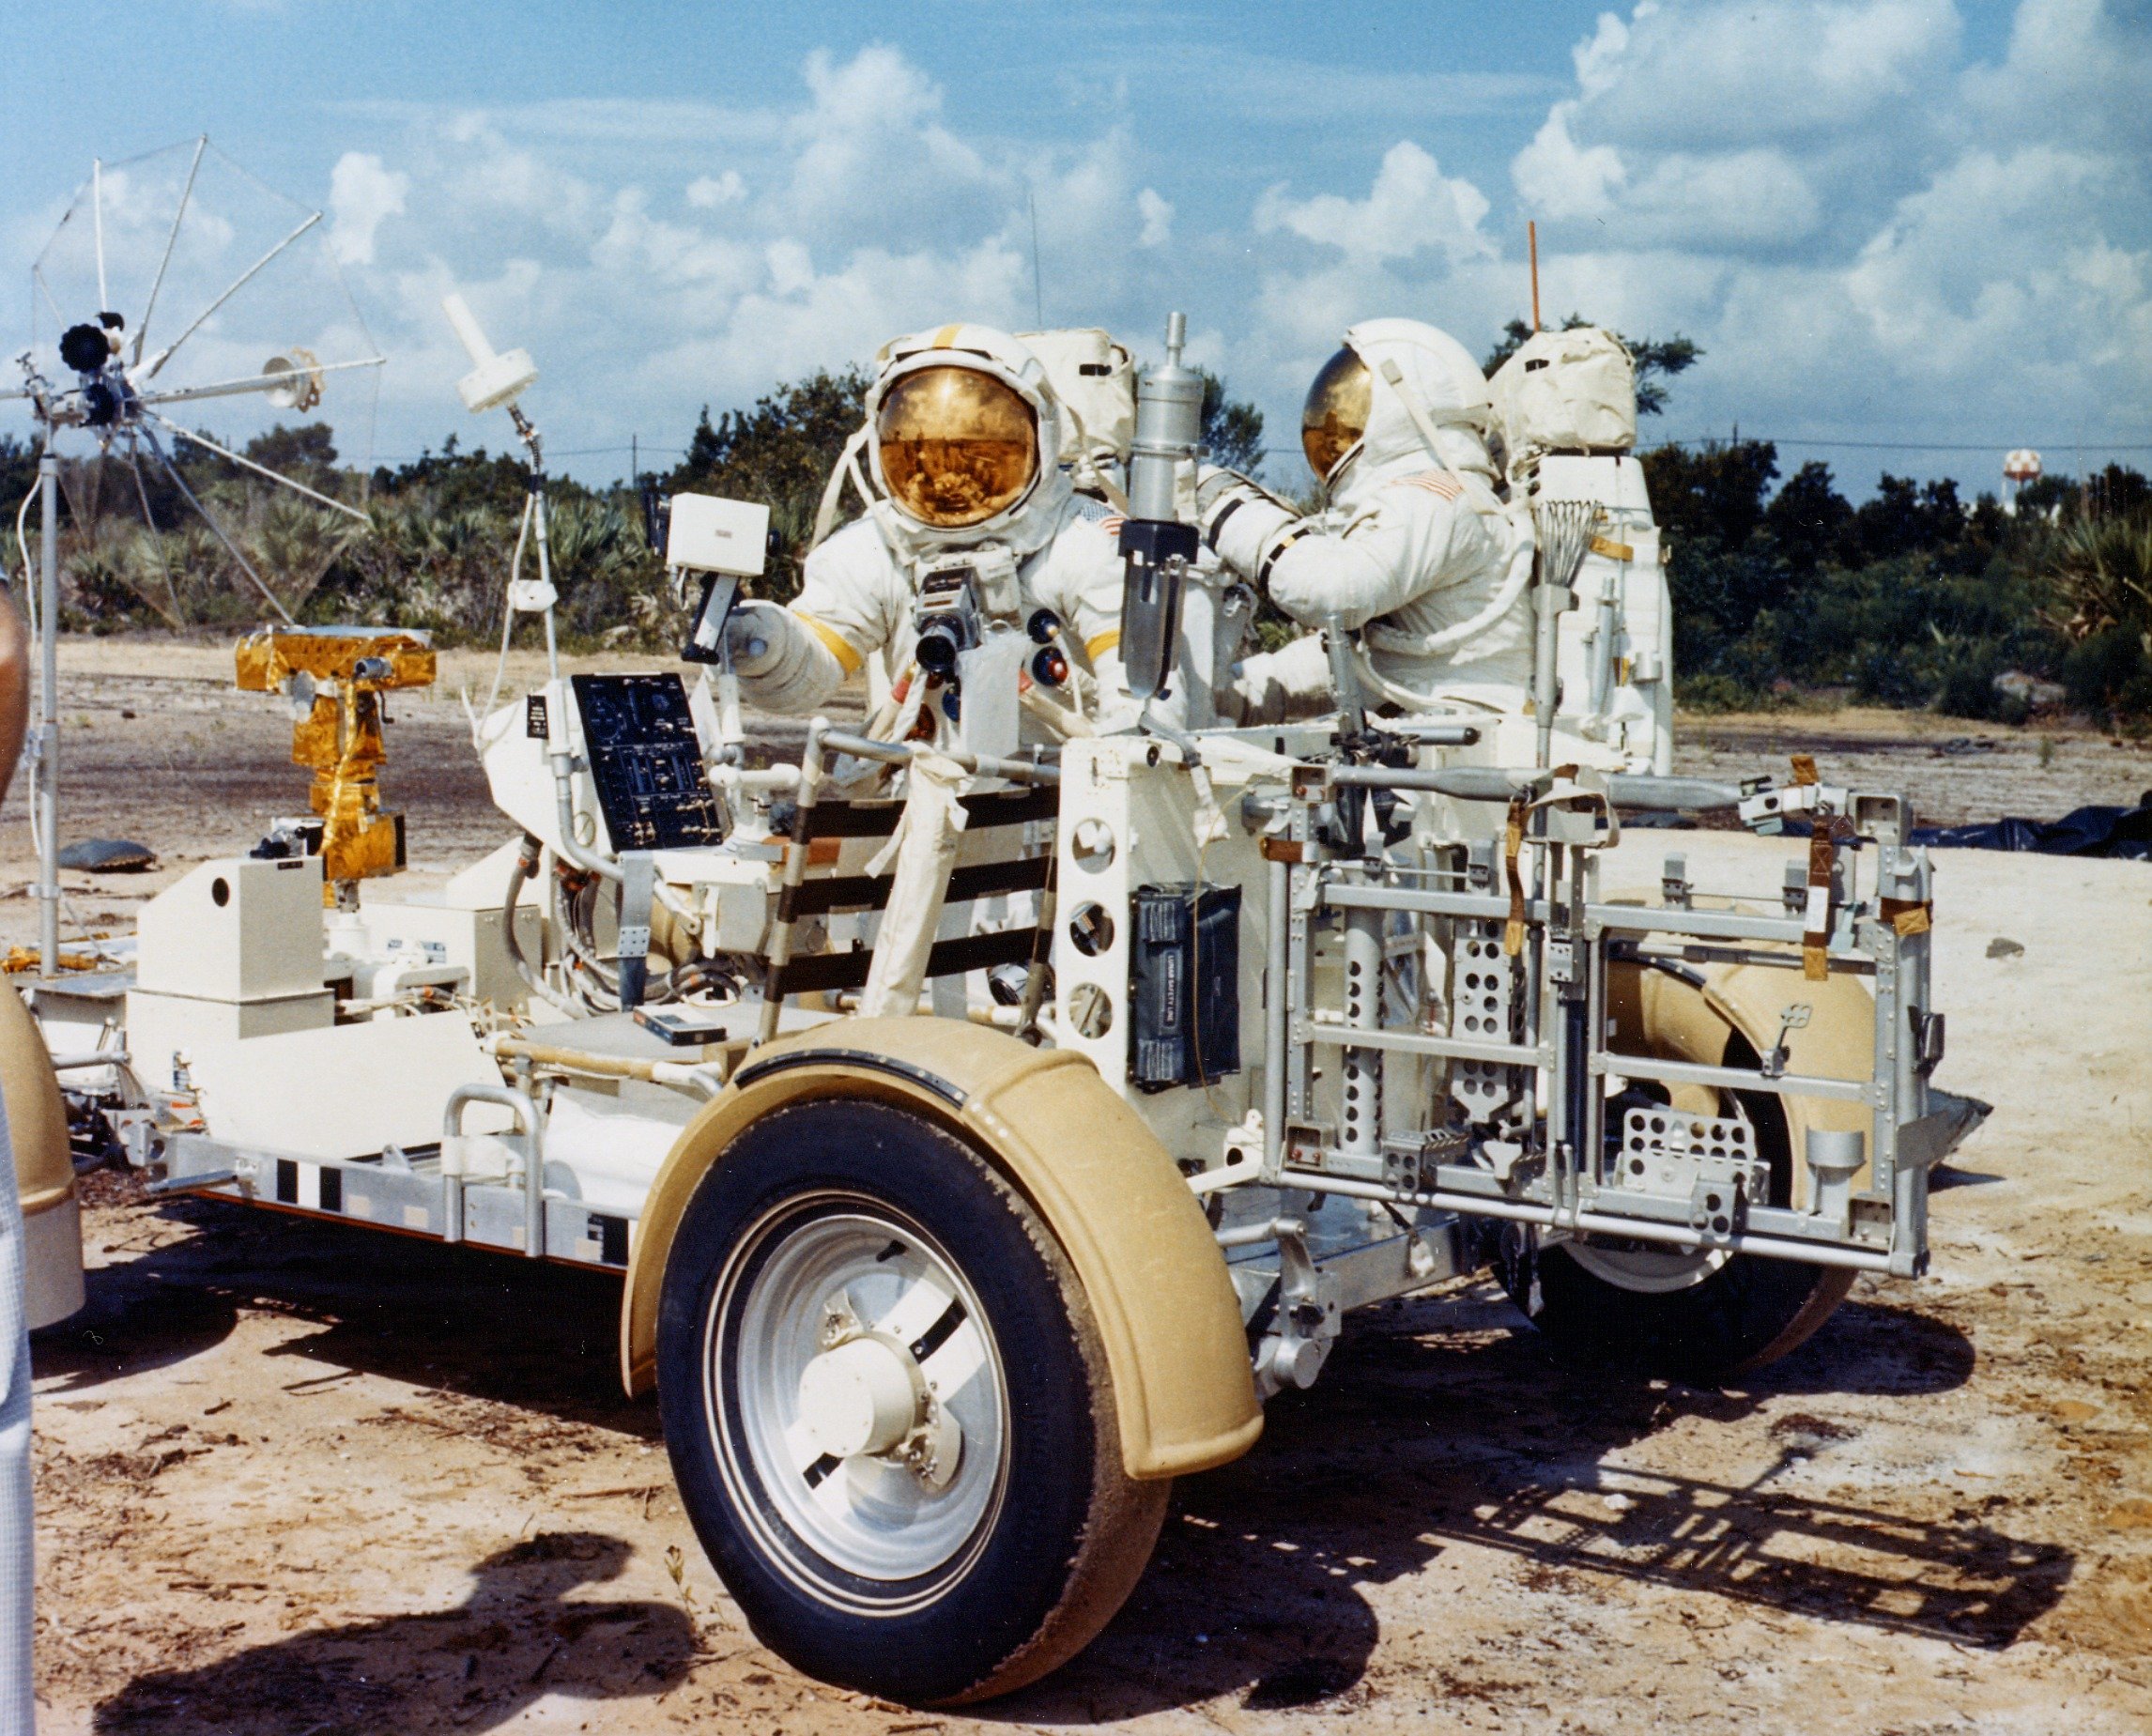 Training for a mission which, for one of them, would never come to pass, Dick Gordon (left) and Jack Schmitt work with a mockup of the Lunar Roving Vehicle (LRV) during their Apollo 15 backup duties. Schmitt's importance as a professional geologist assured him a seat on Apollo 17. Gordon was not so lucky. Photo Credit: NASA